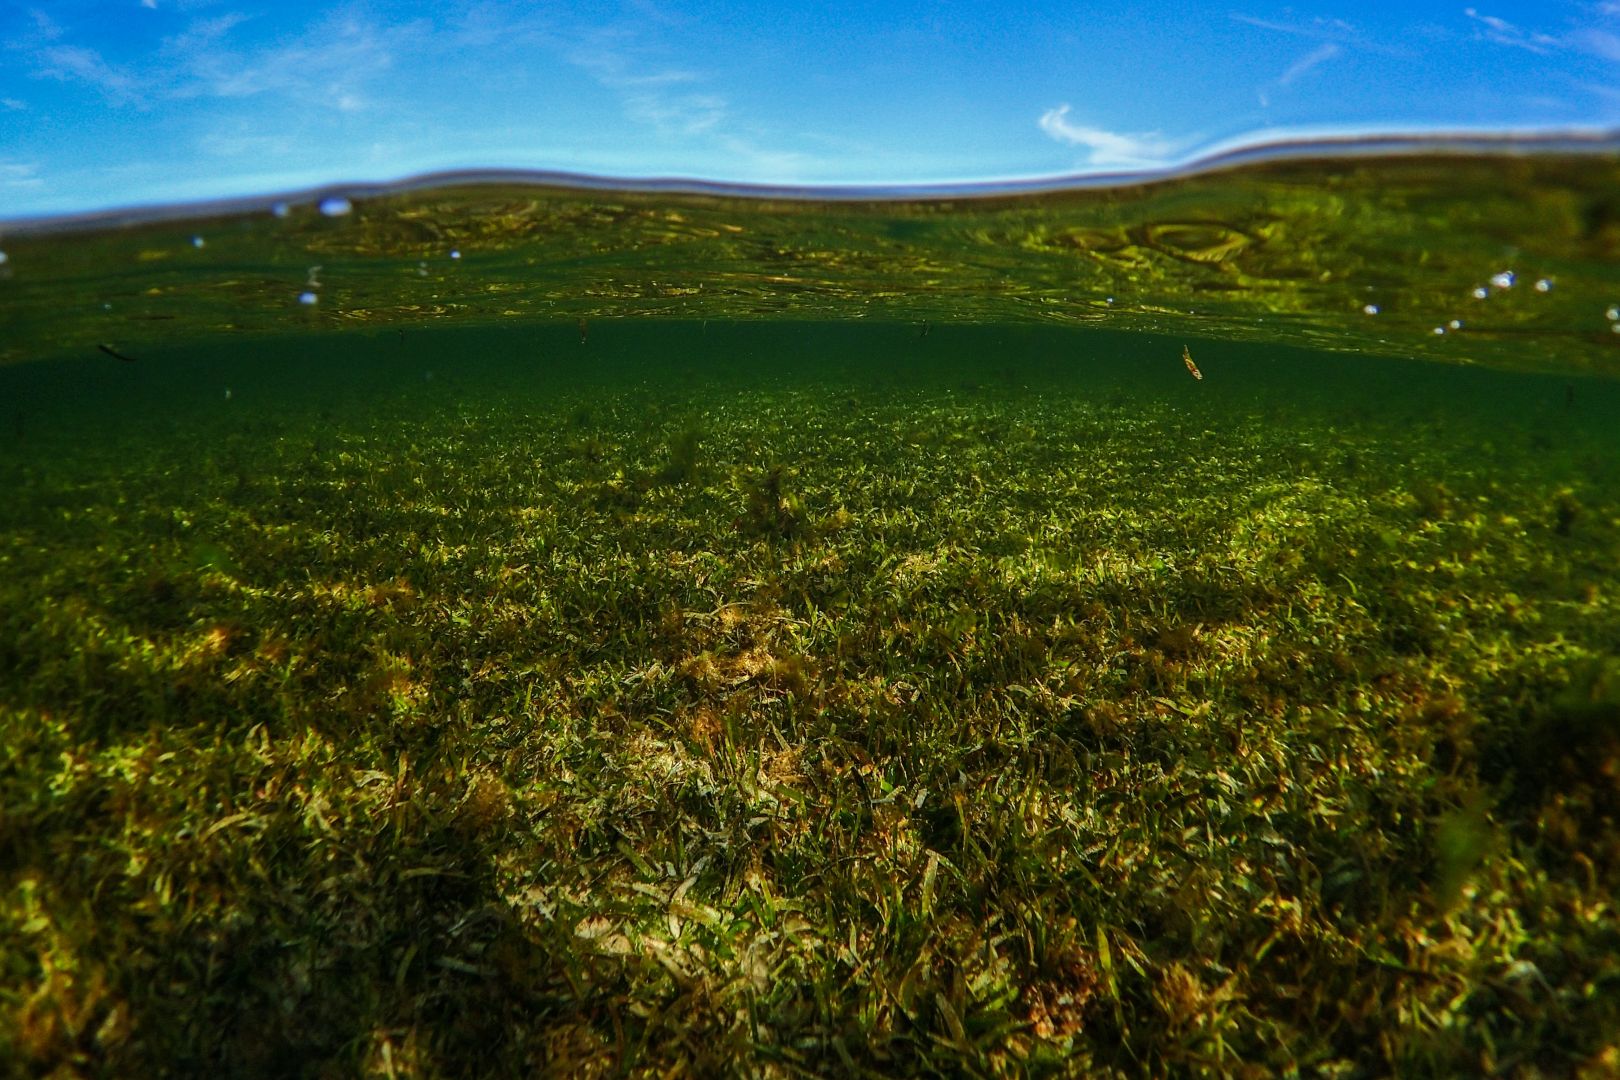 Seagrass Meadows Shrank by 92% in UK Waters – Restoring Them Could Absorb Carbon Emissions and Boost Fish